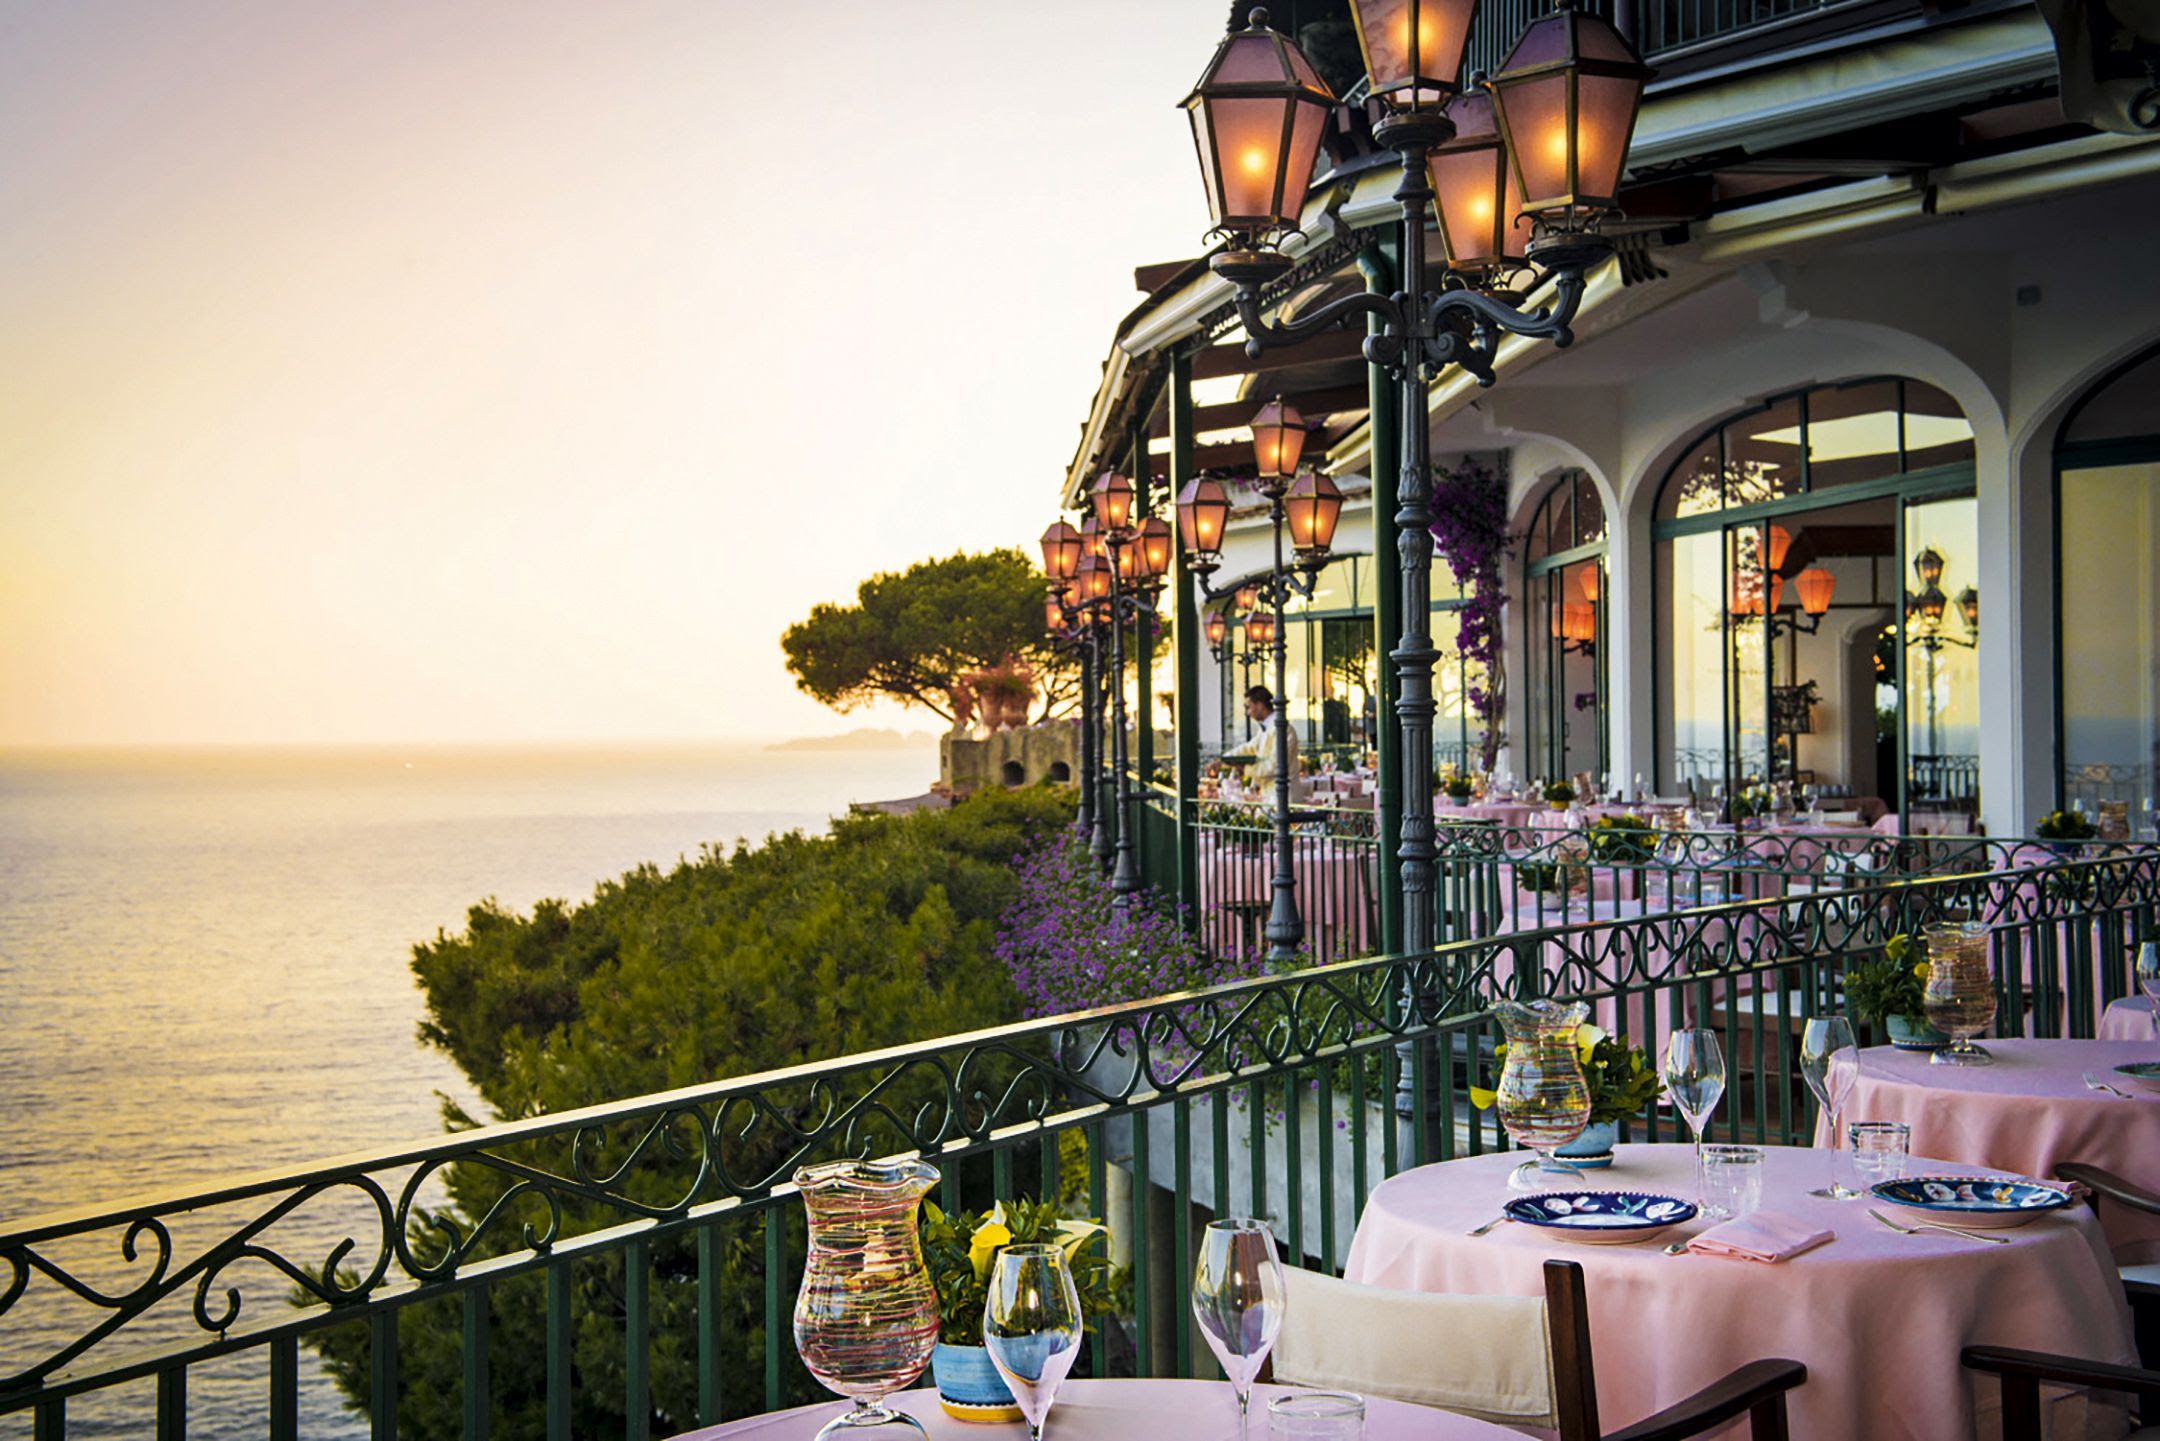 We ate very well during our week. Haute cuisine by cliffside vistas in Sorrento Amalfi